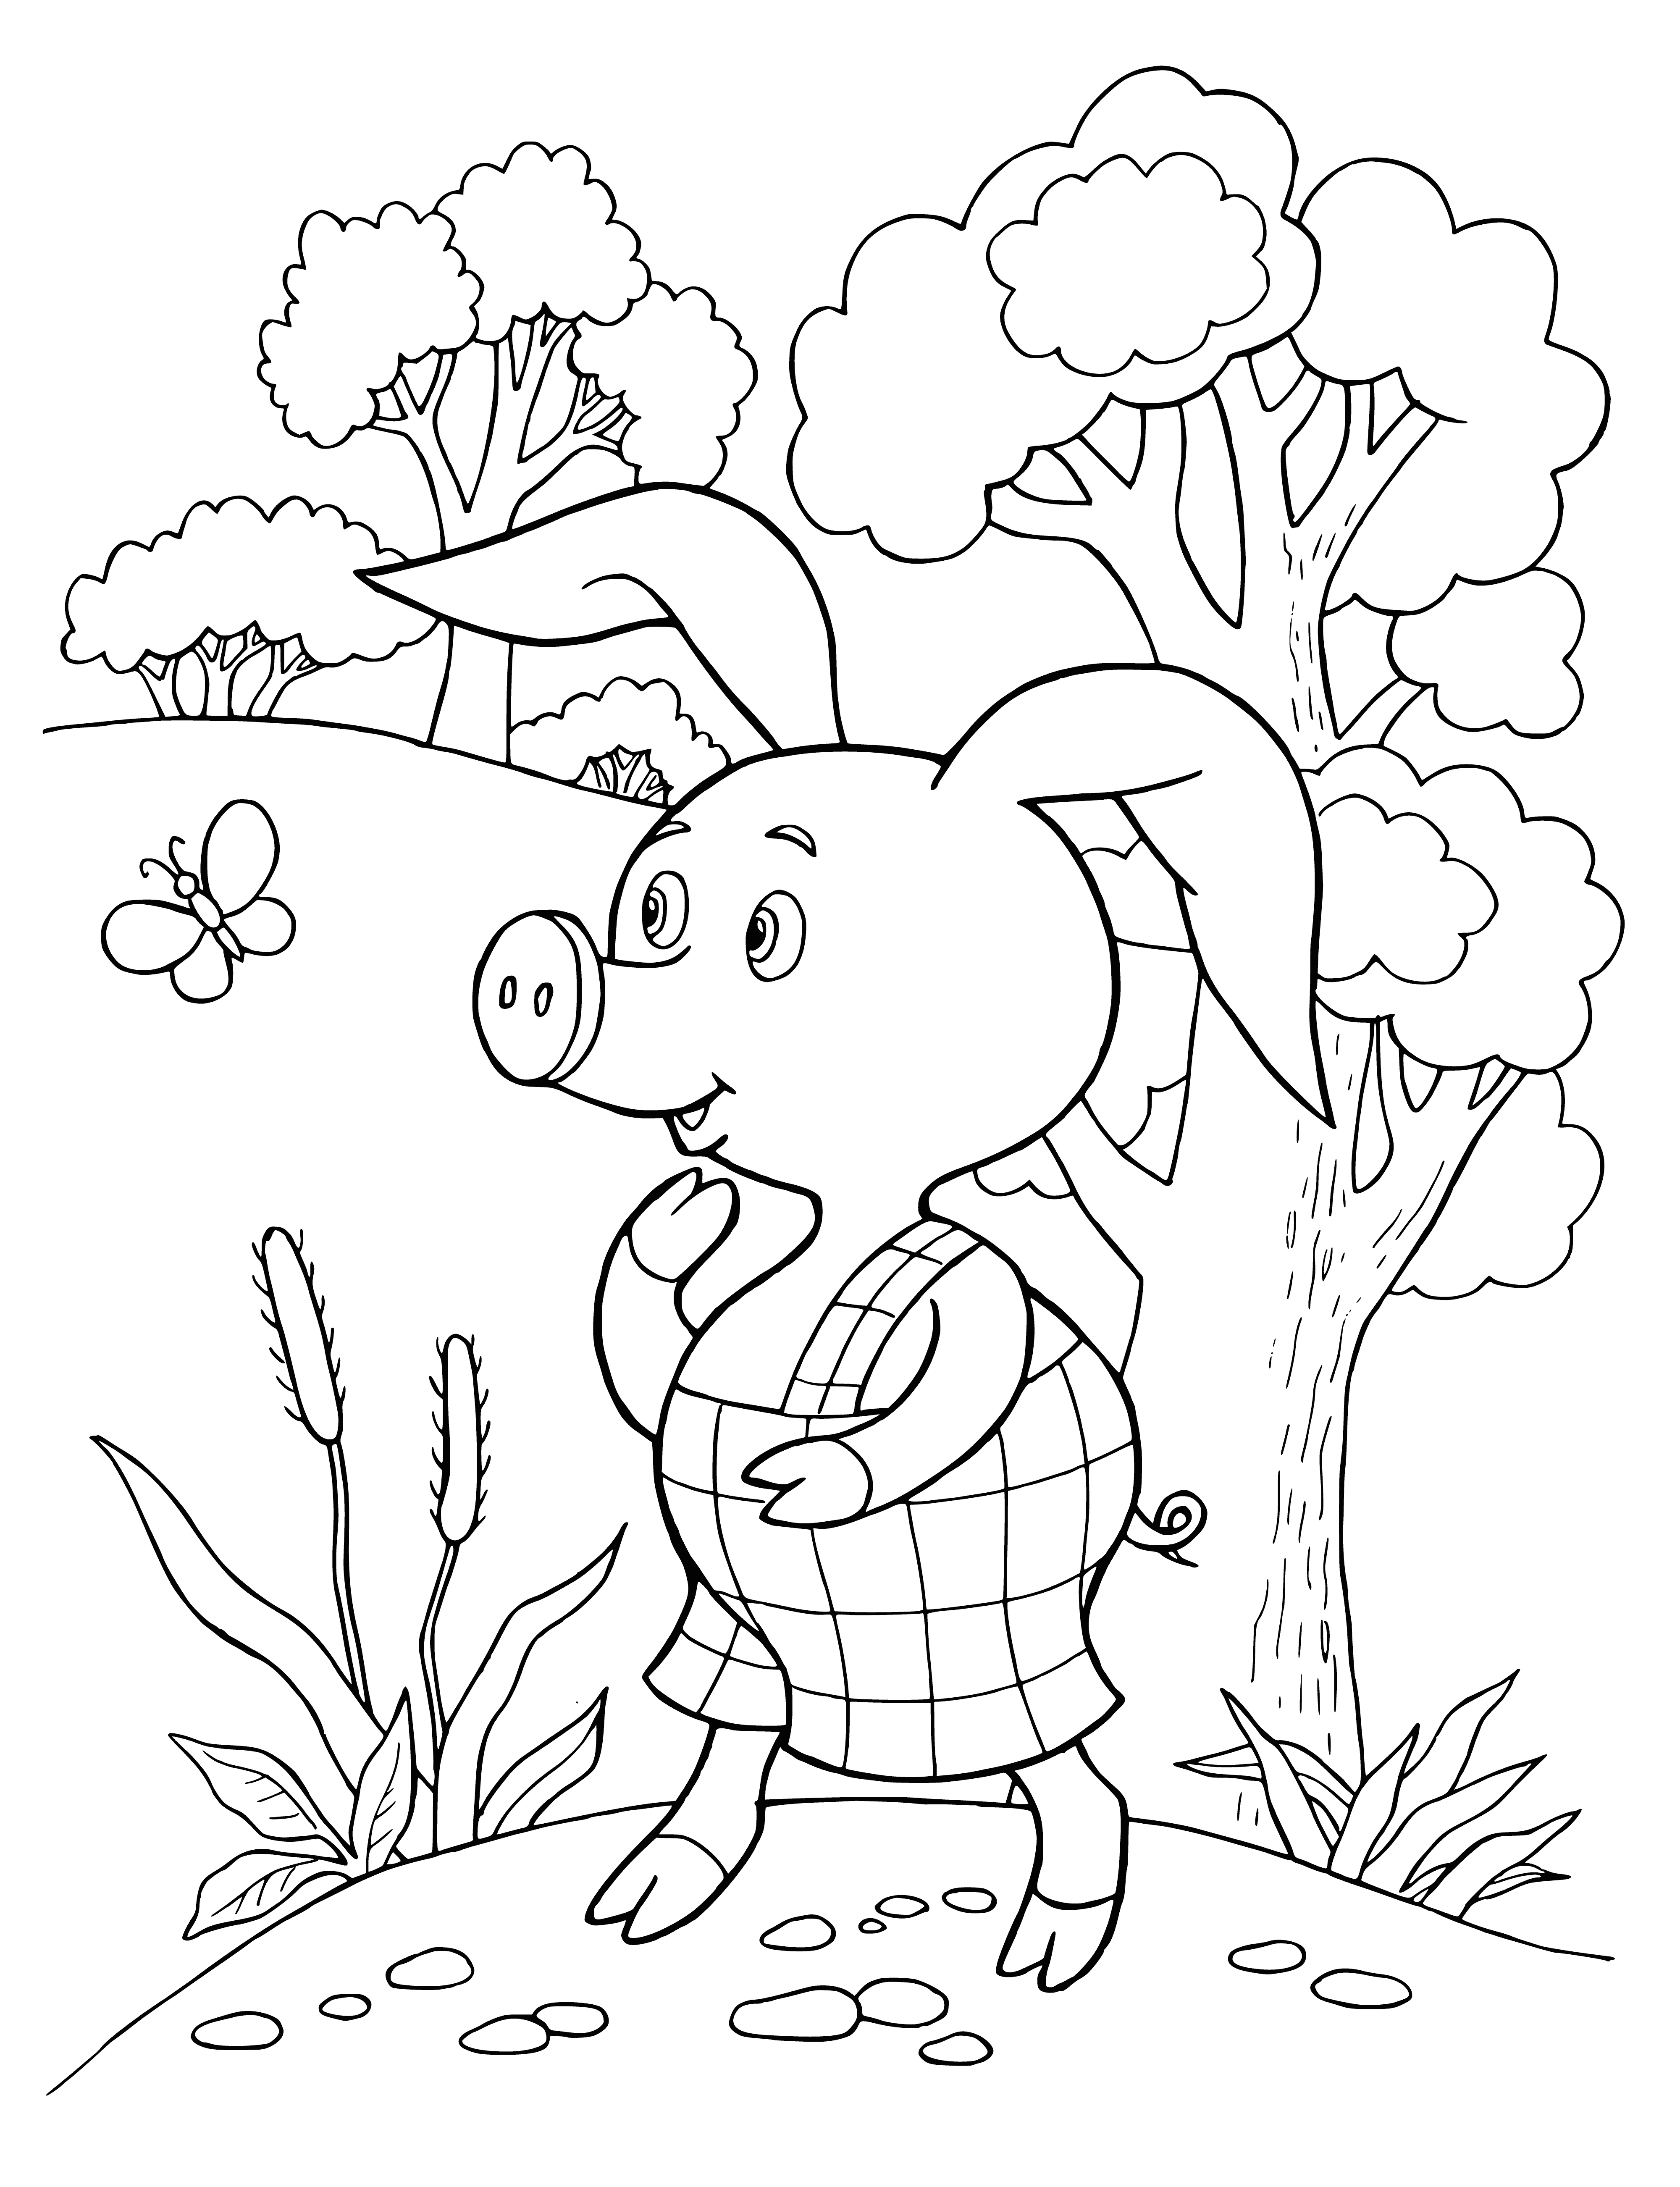 coloring page: Piglet is a small, pale-pink pig with black hooves and a red scarf. Has large head, small eyes, long snout and big ears with a small, curly tail.